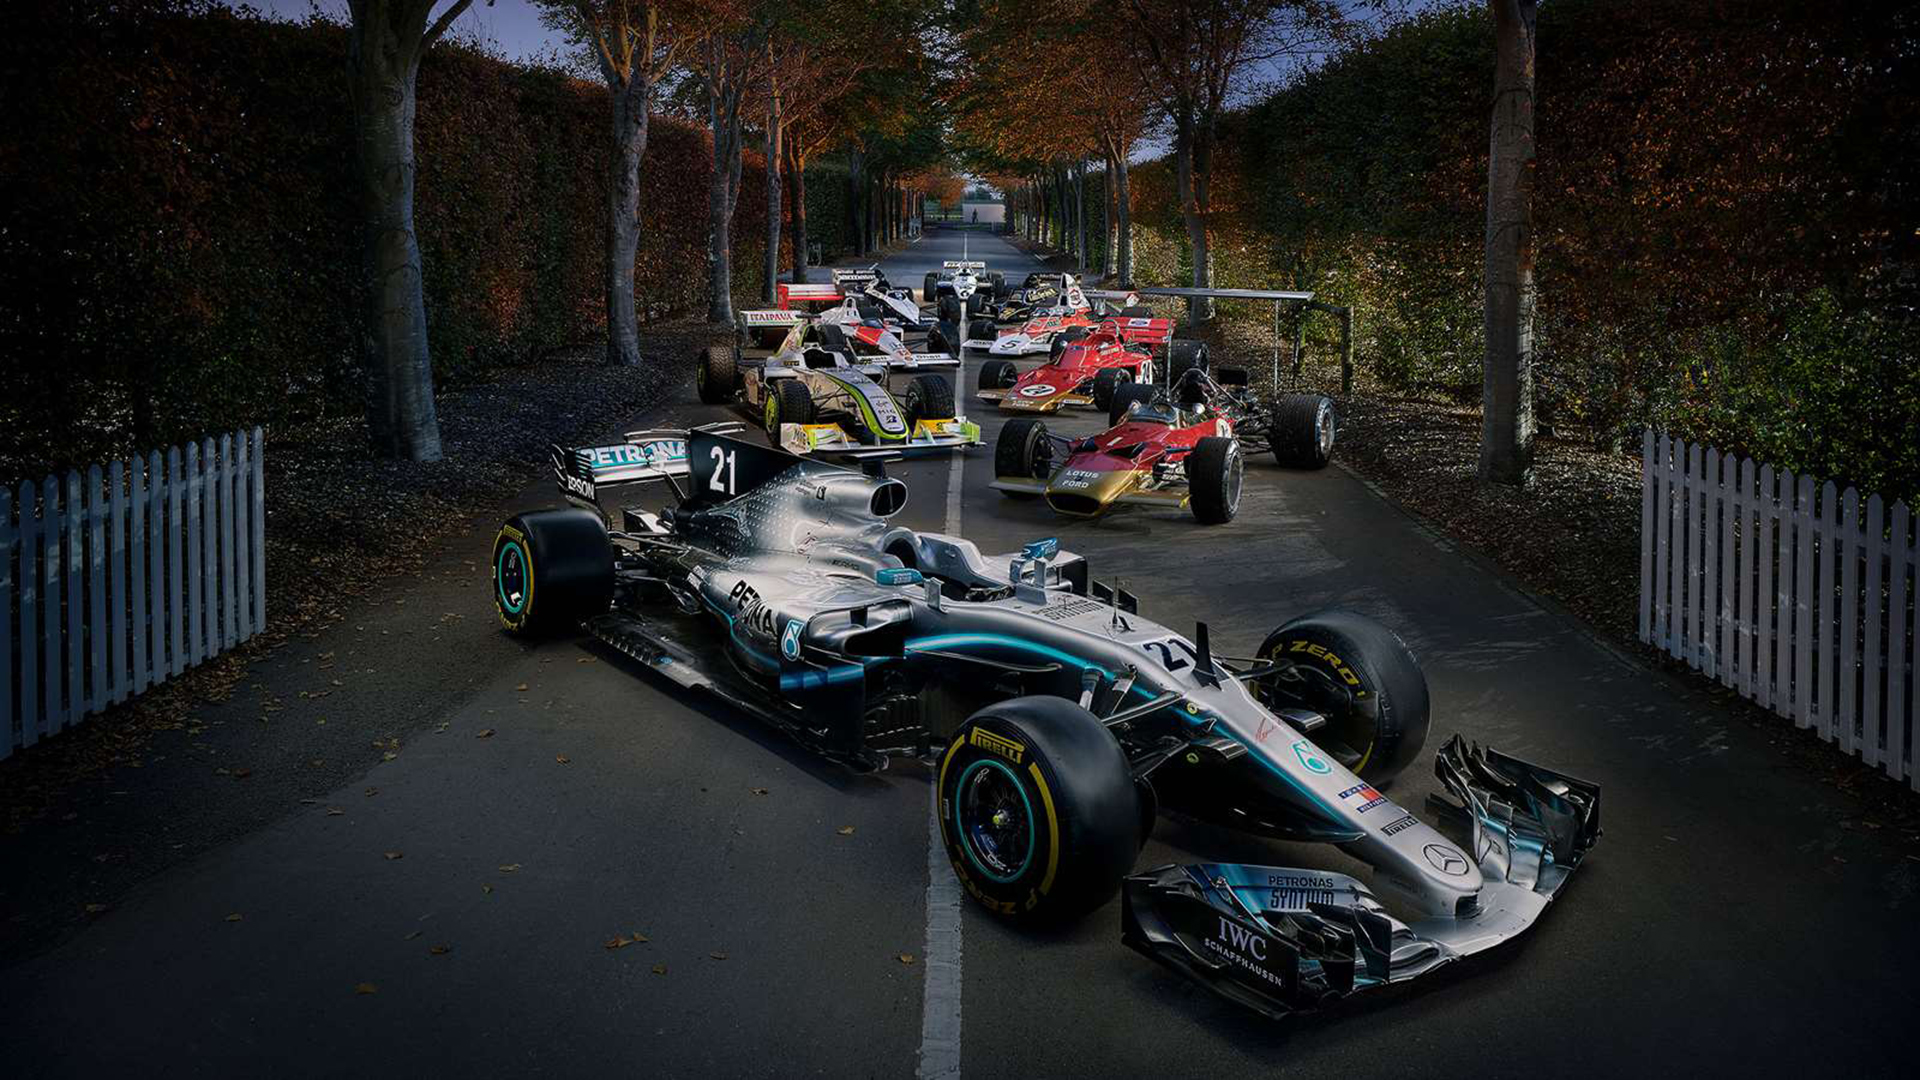 Formula 1 machines of all time are distinguished at Goodwood.  A Mercedes, two Lotus, McLaren, BrawnGP, Brabham and a Williams at the end are shown in the photo (https://www.goodwood.com/)